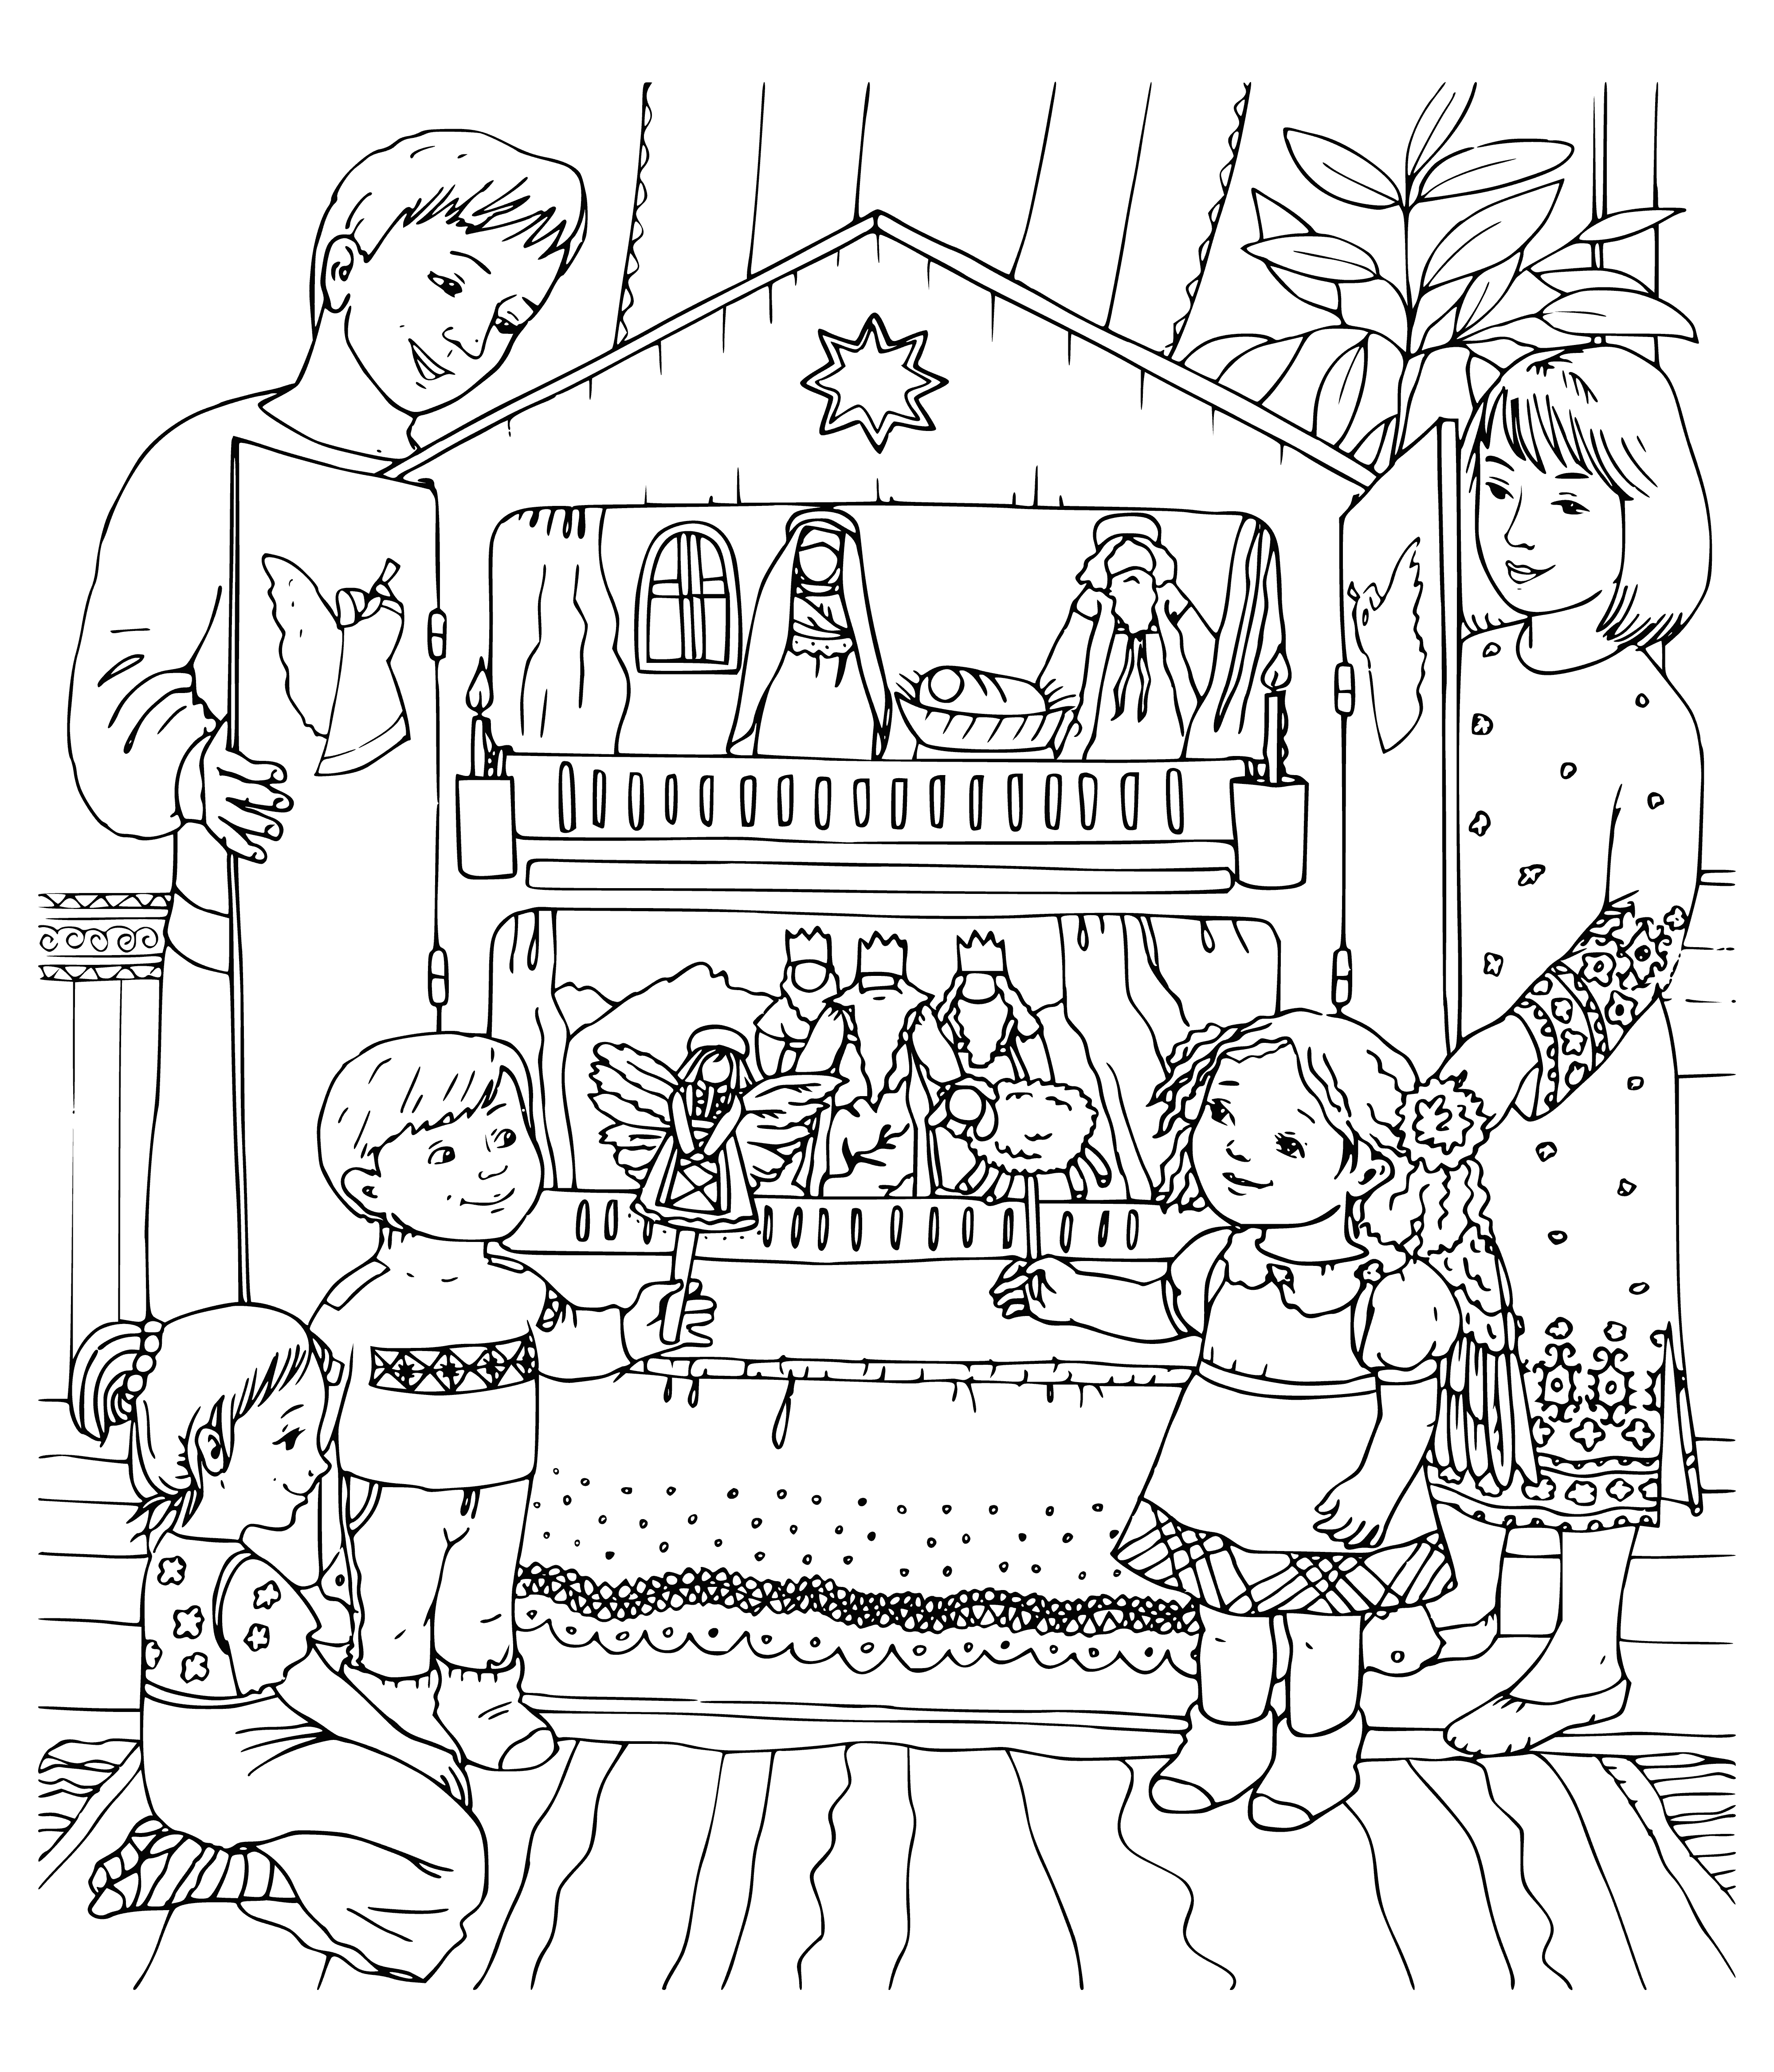 coloring page: A theater with Christmas decorations, a stage set up with a tree & presents, and actors in Santa hats. A festive holiday play is in session! #Christmas